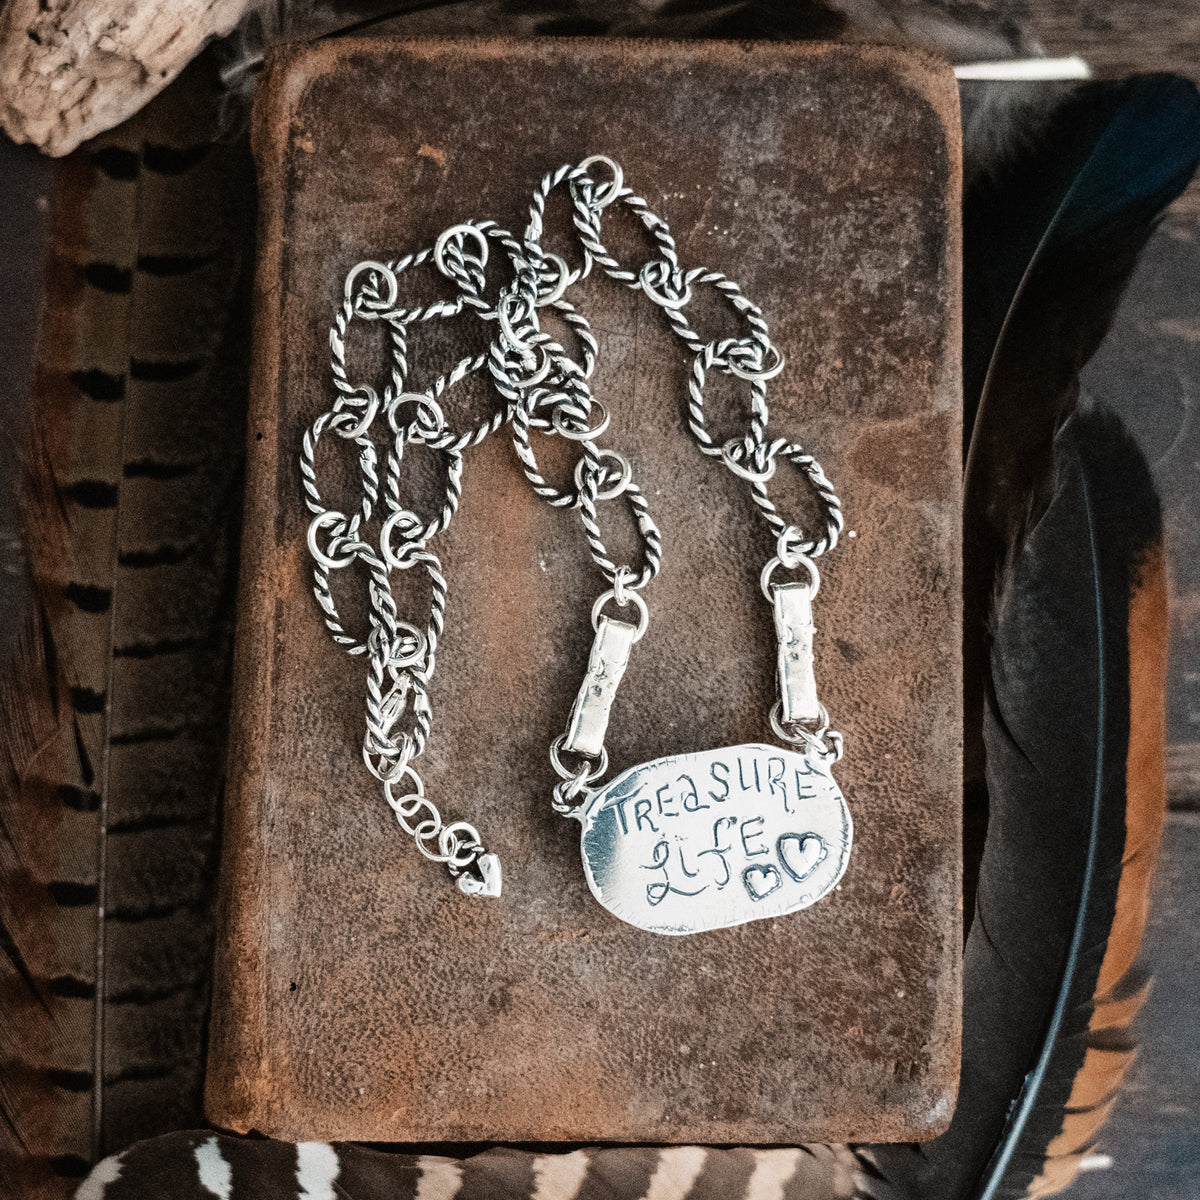 Out West Turquoise Necklace